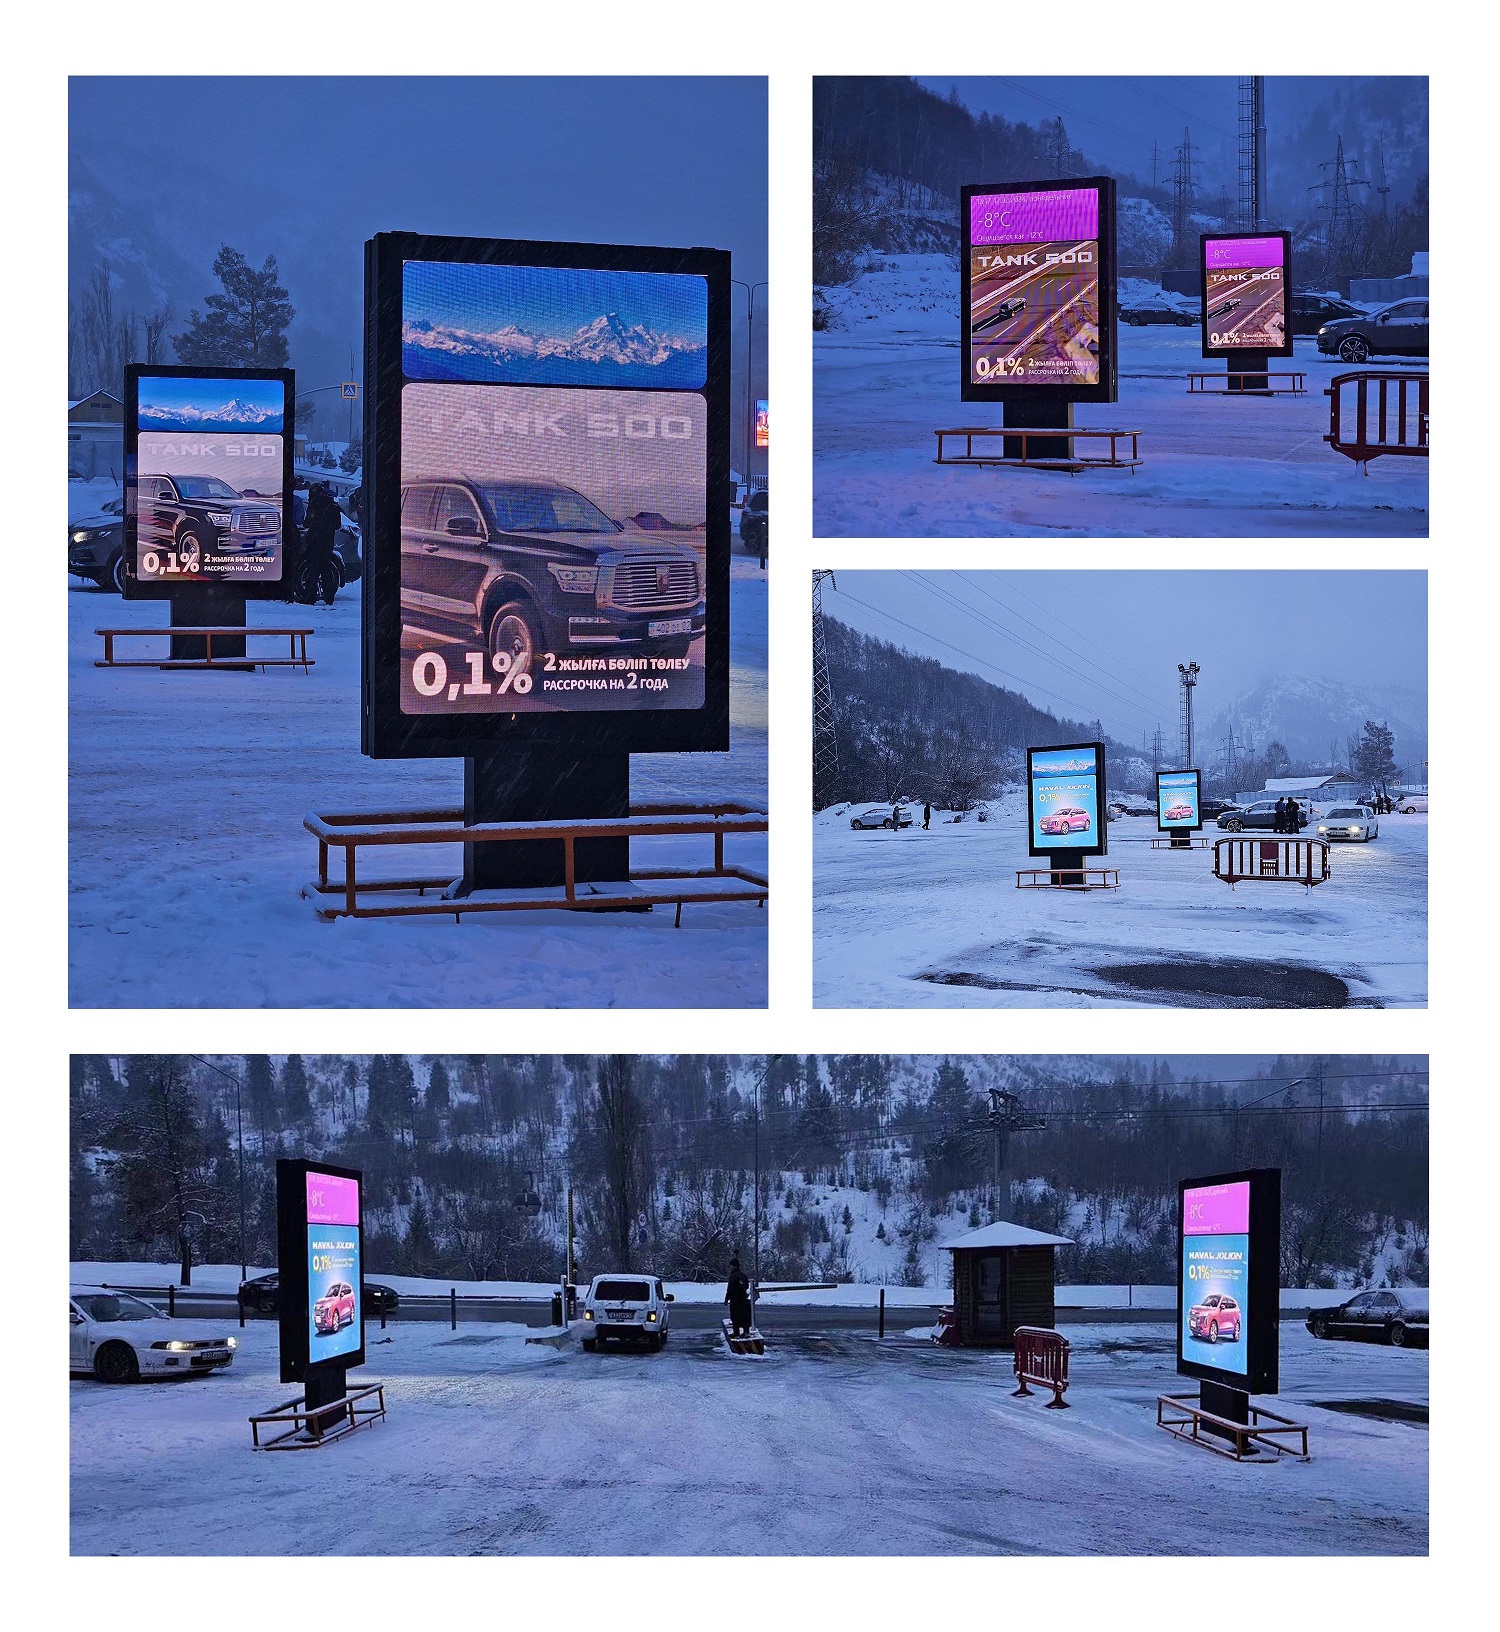 Dual-sided LED billboard with thermal management system for snow-covered environments